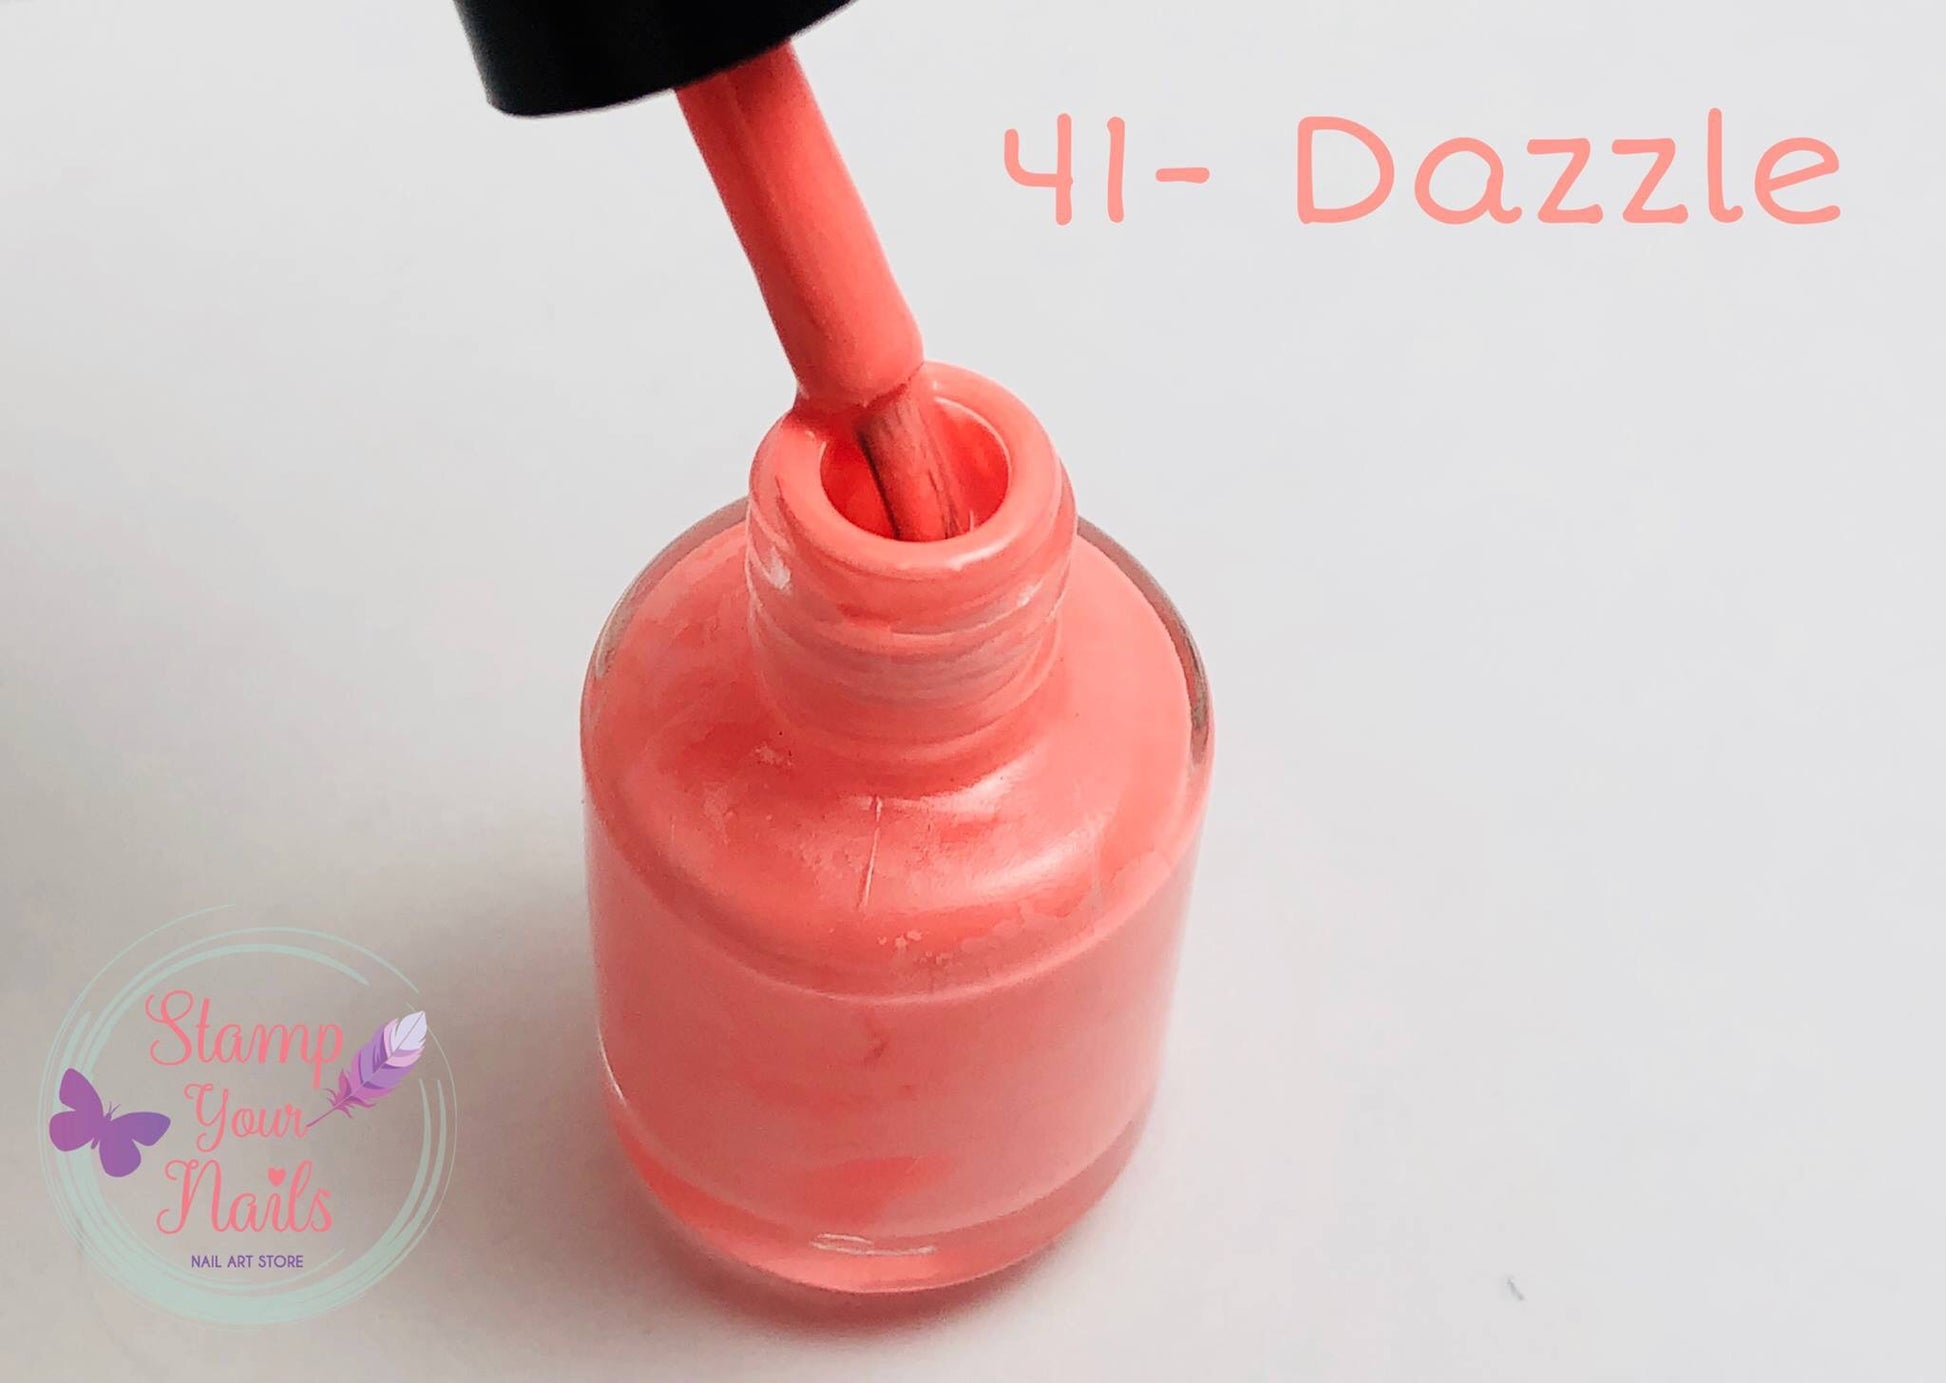 41 Dazzle - Stamp your nails